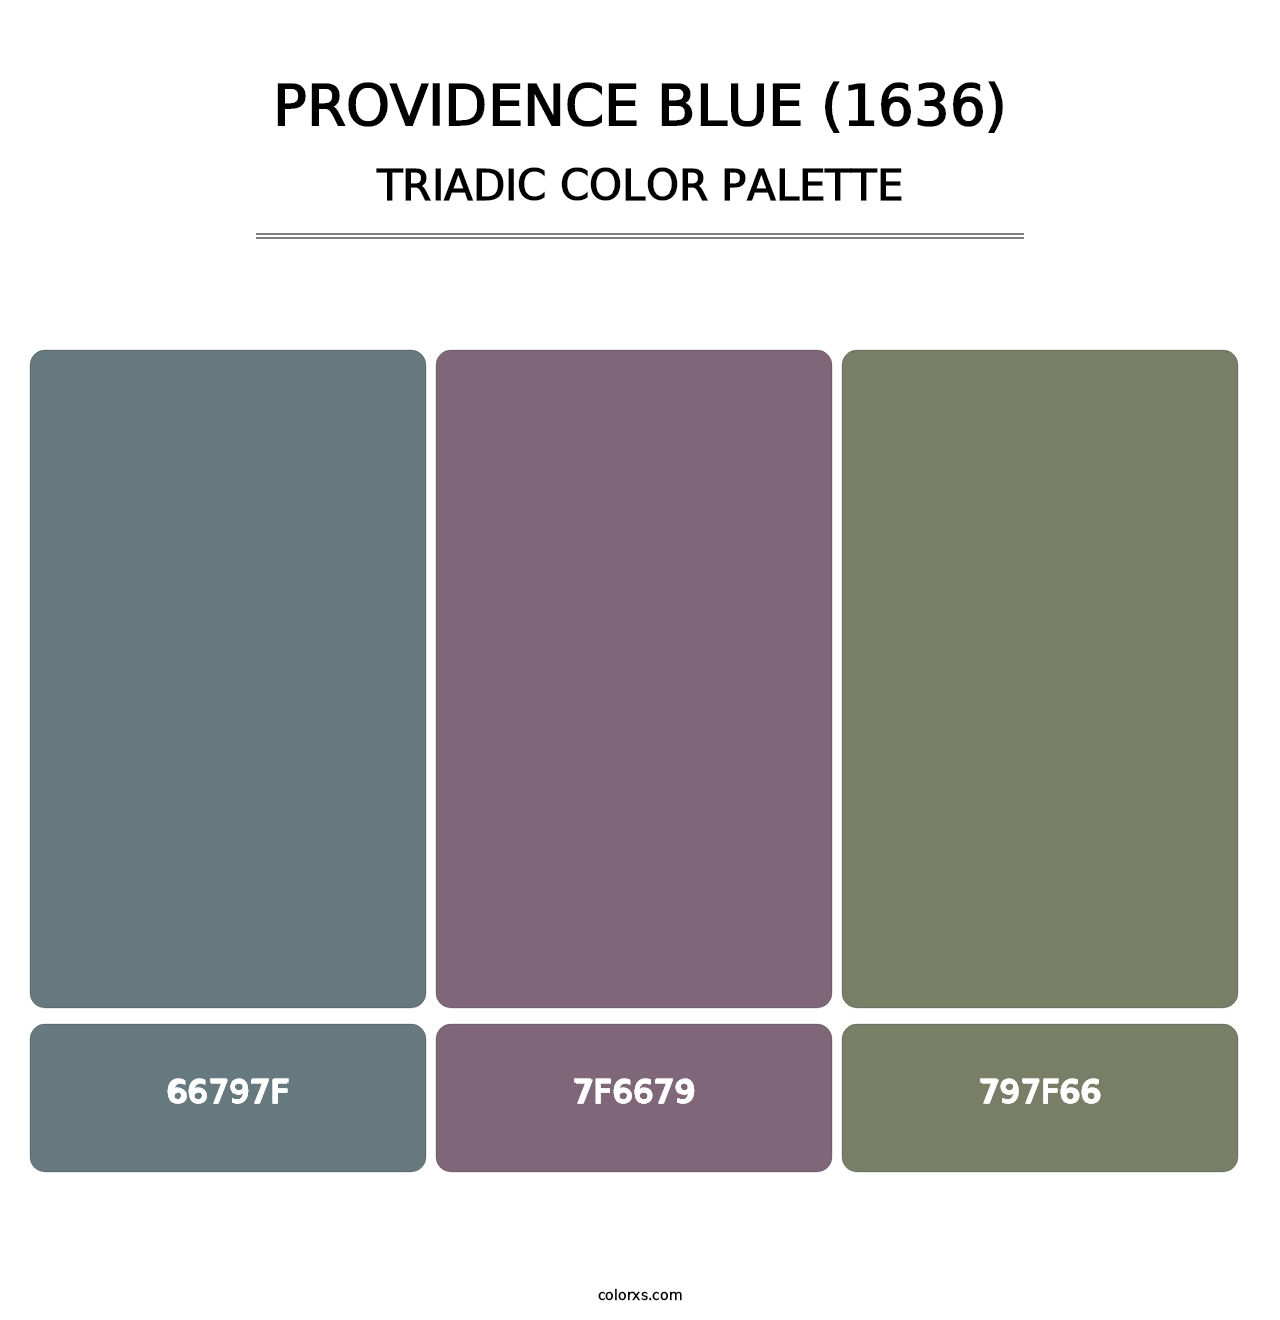 Providence Blue (1636) - Triadic Color Palette